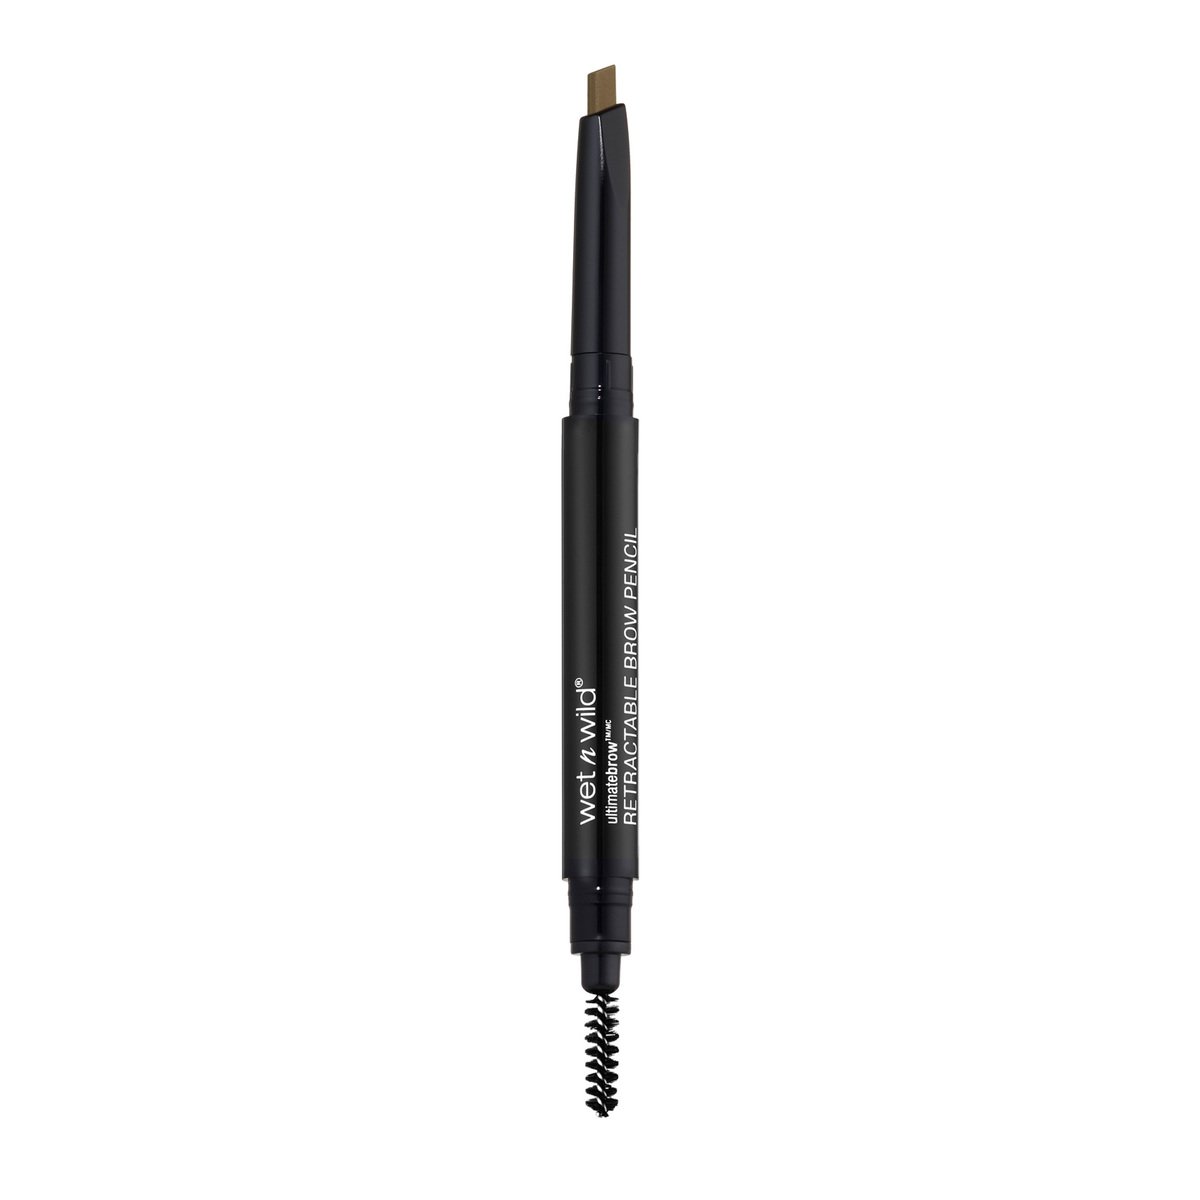 Wet And Wild Ultimate Brow Retractable Pencil - Ash Brown  WnW00E626A 1pc